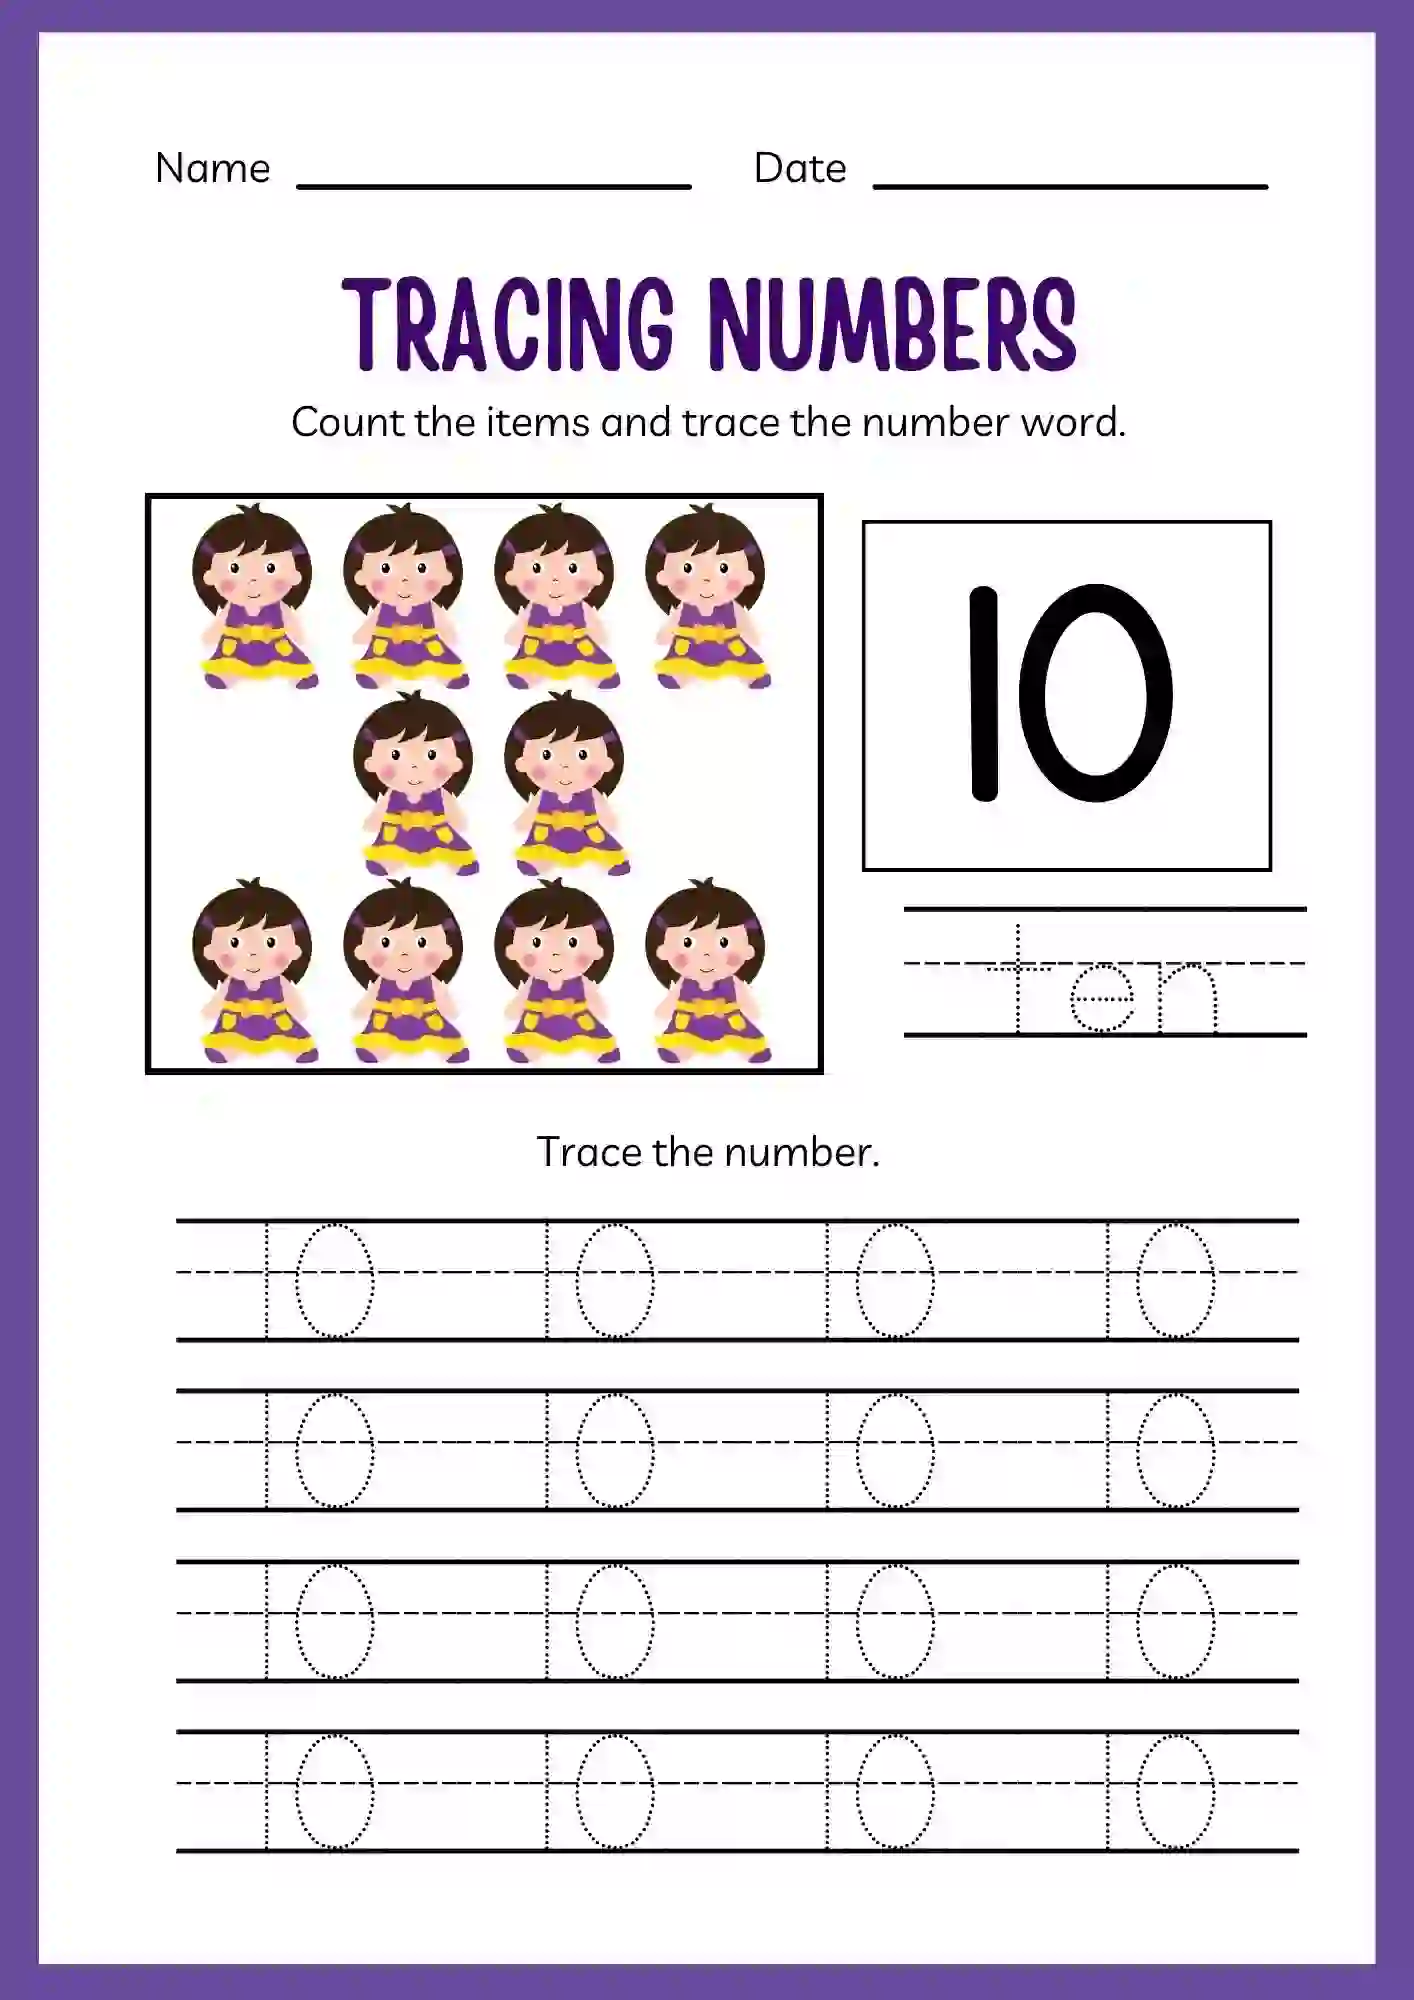 Number Tracing Worksheets 1 to 20 (Number 10 tracing sheet)